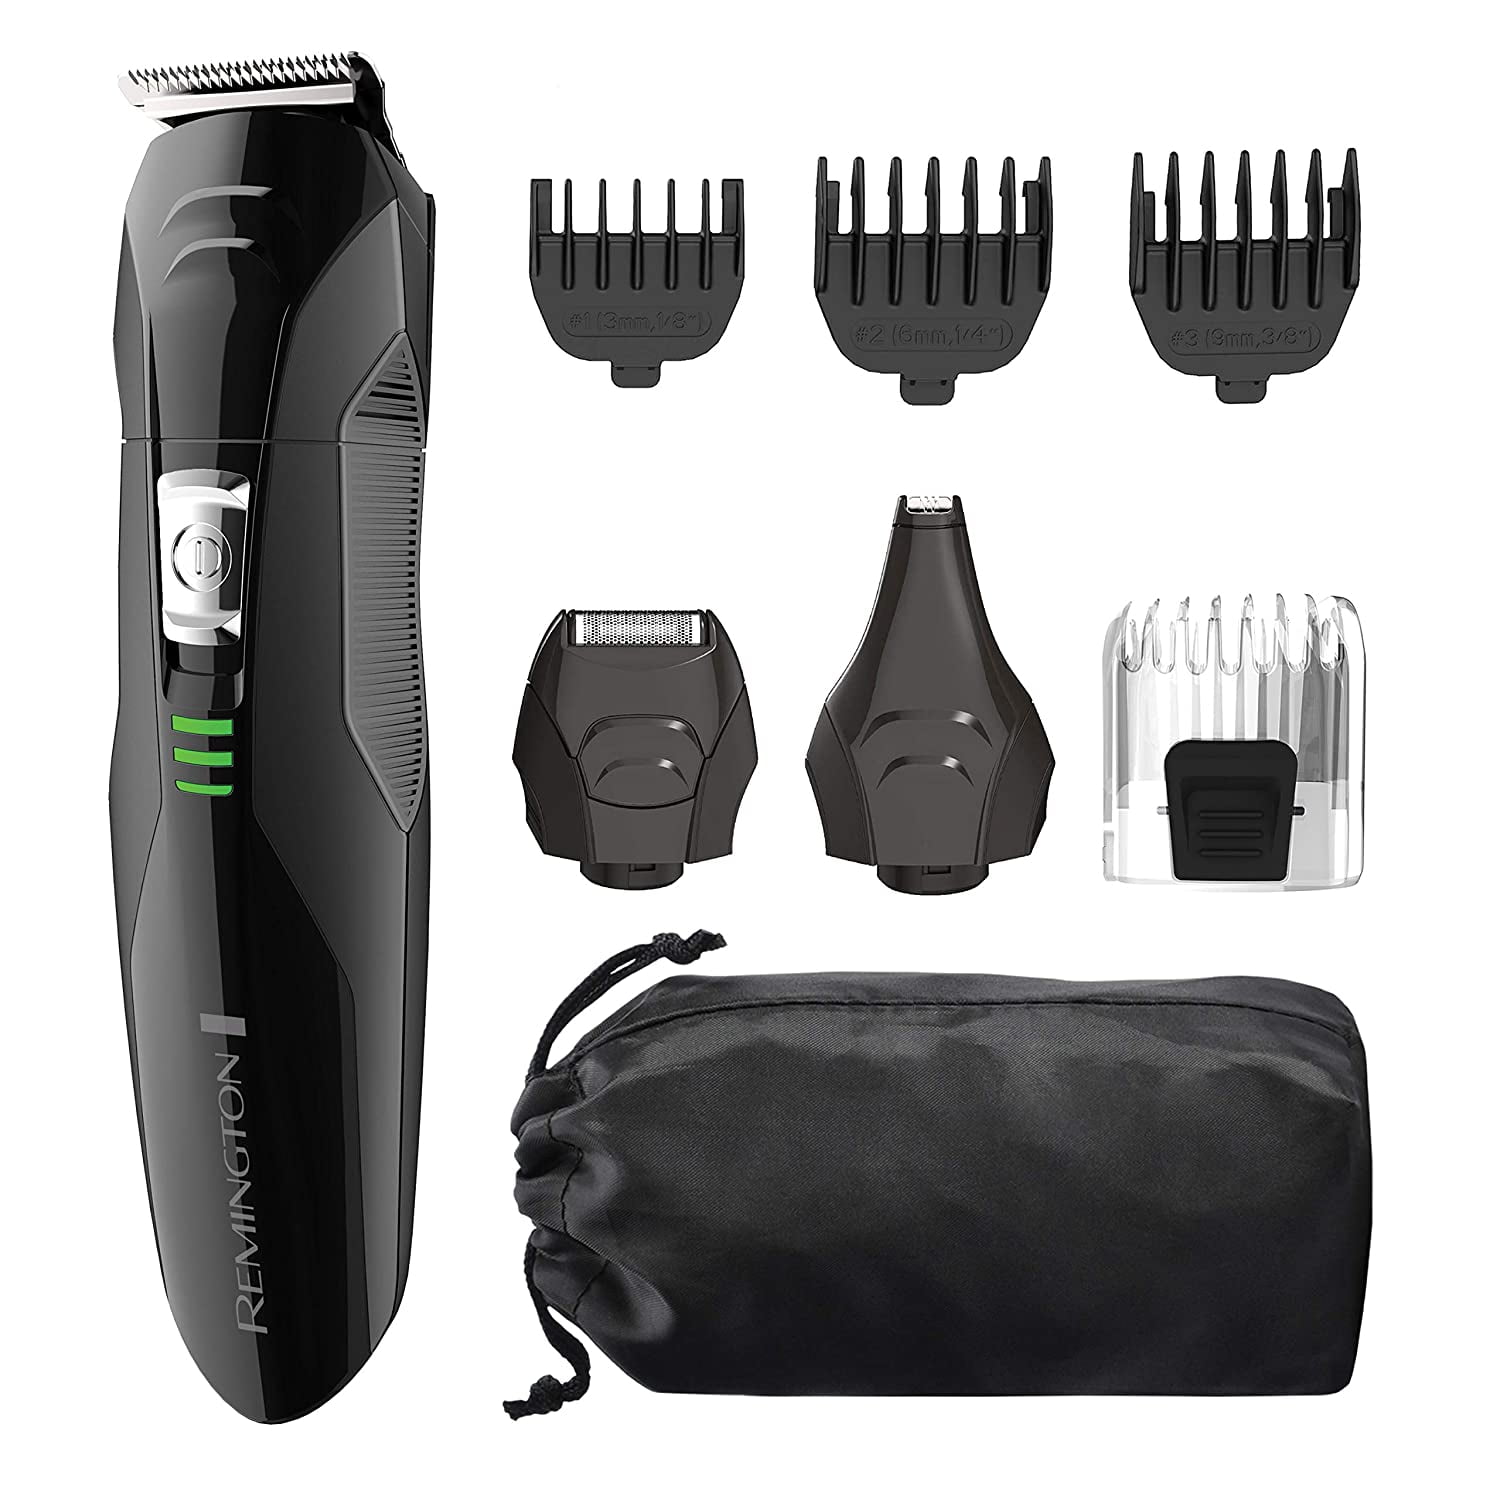 Grooming Kit, Lithium Powered, 8 Piece Set with Trimmer, Men's Shaver, Clippers, Beard Stubble Combs, PG6025, Black - Walmart.com